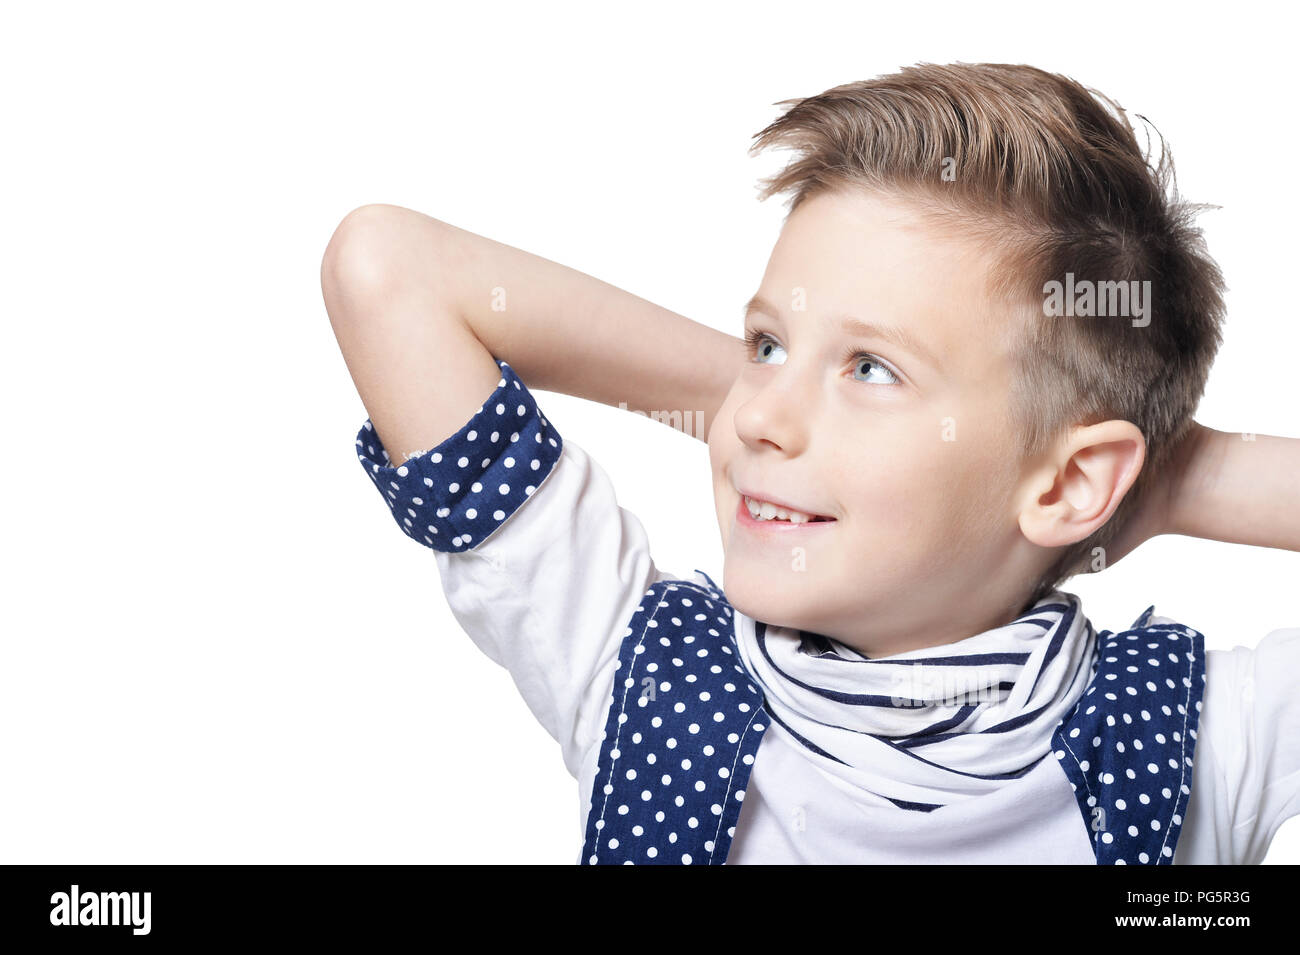 cute little boy posing isolated on white background Stock Photo